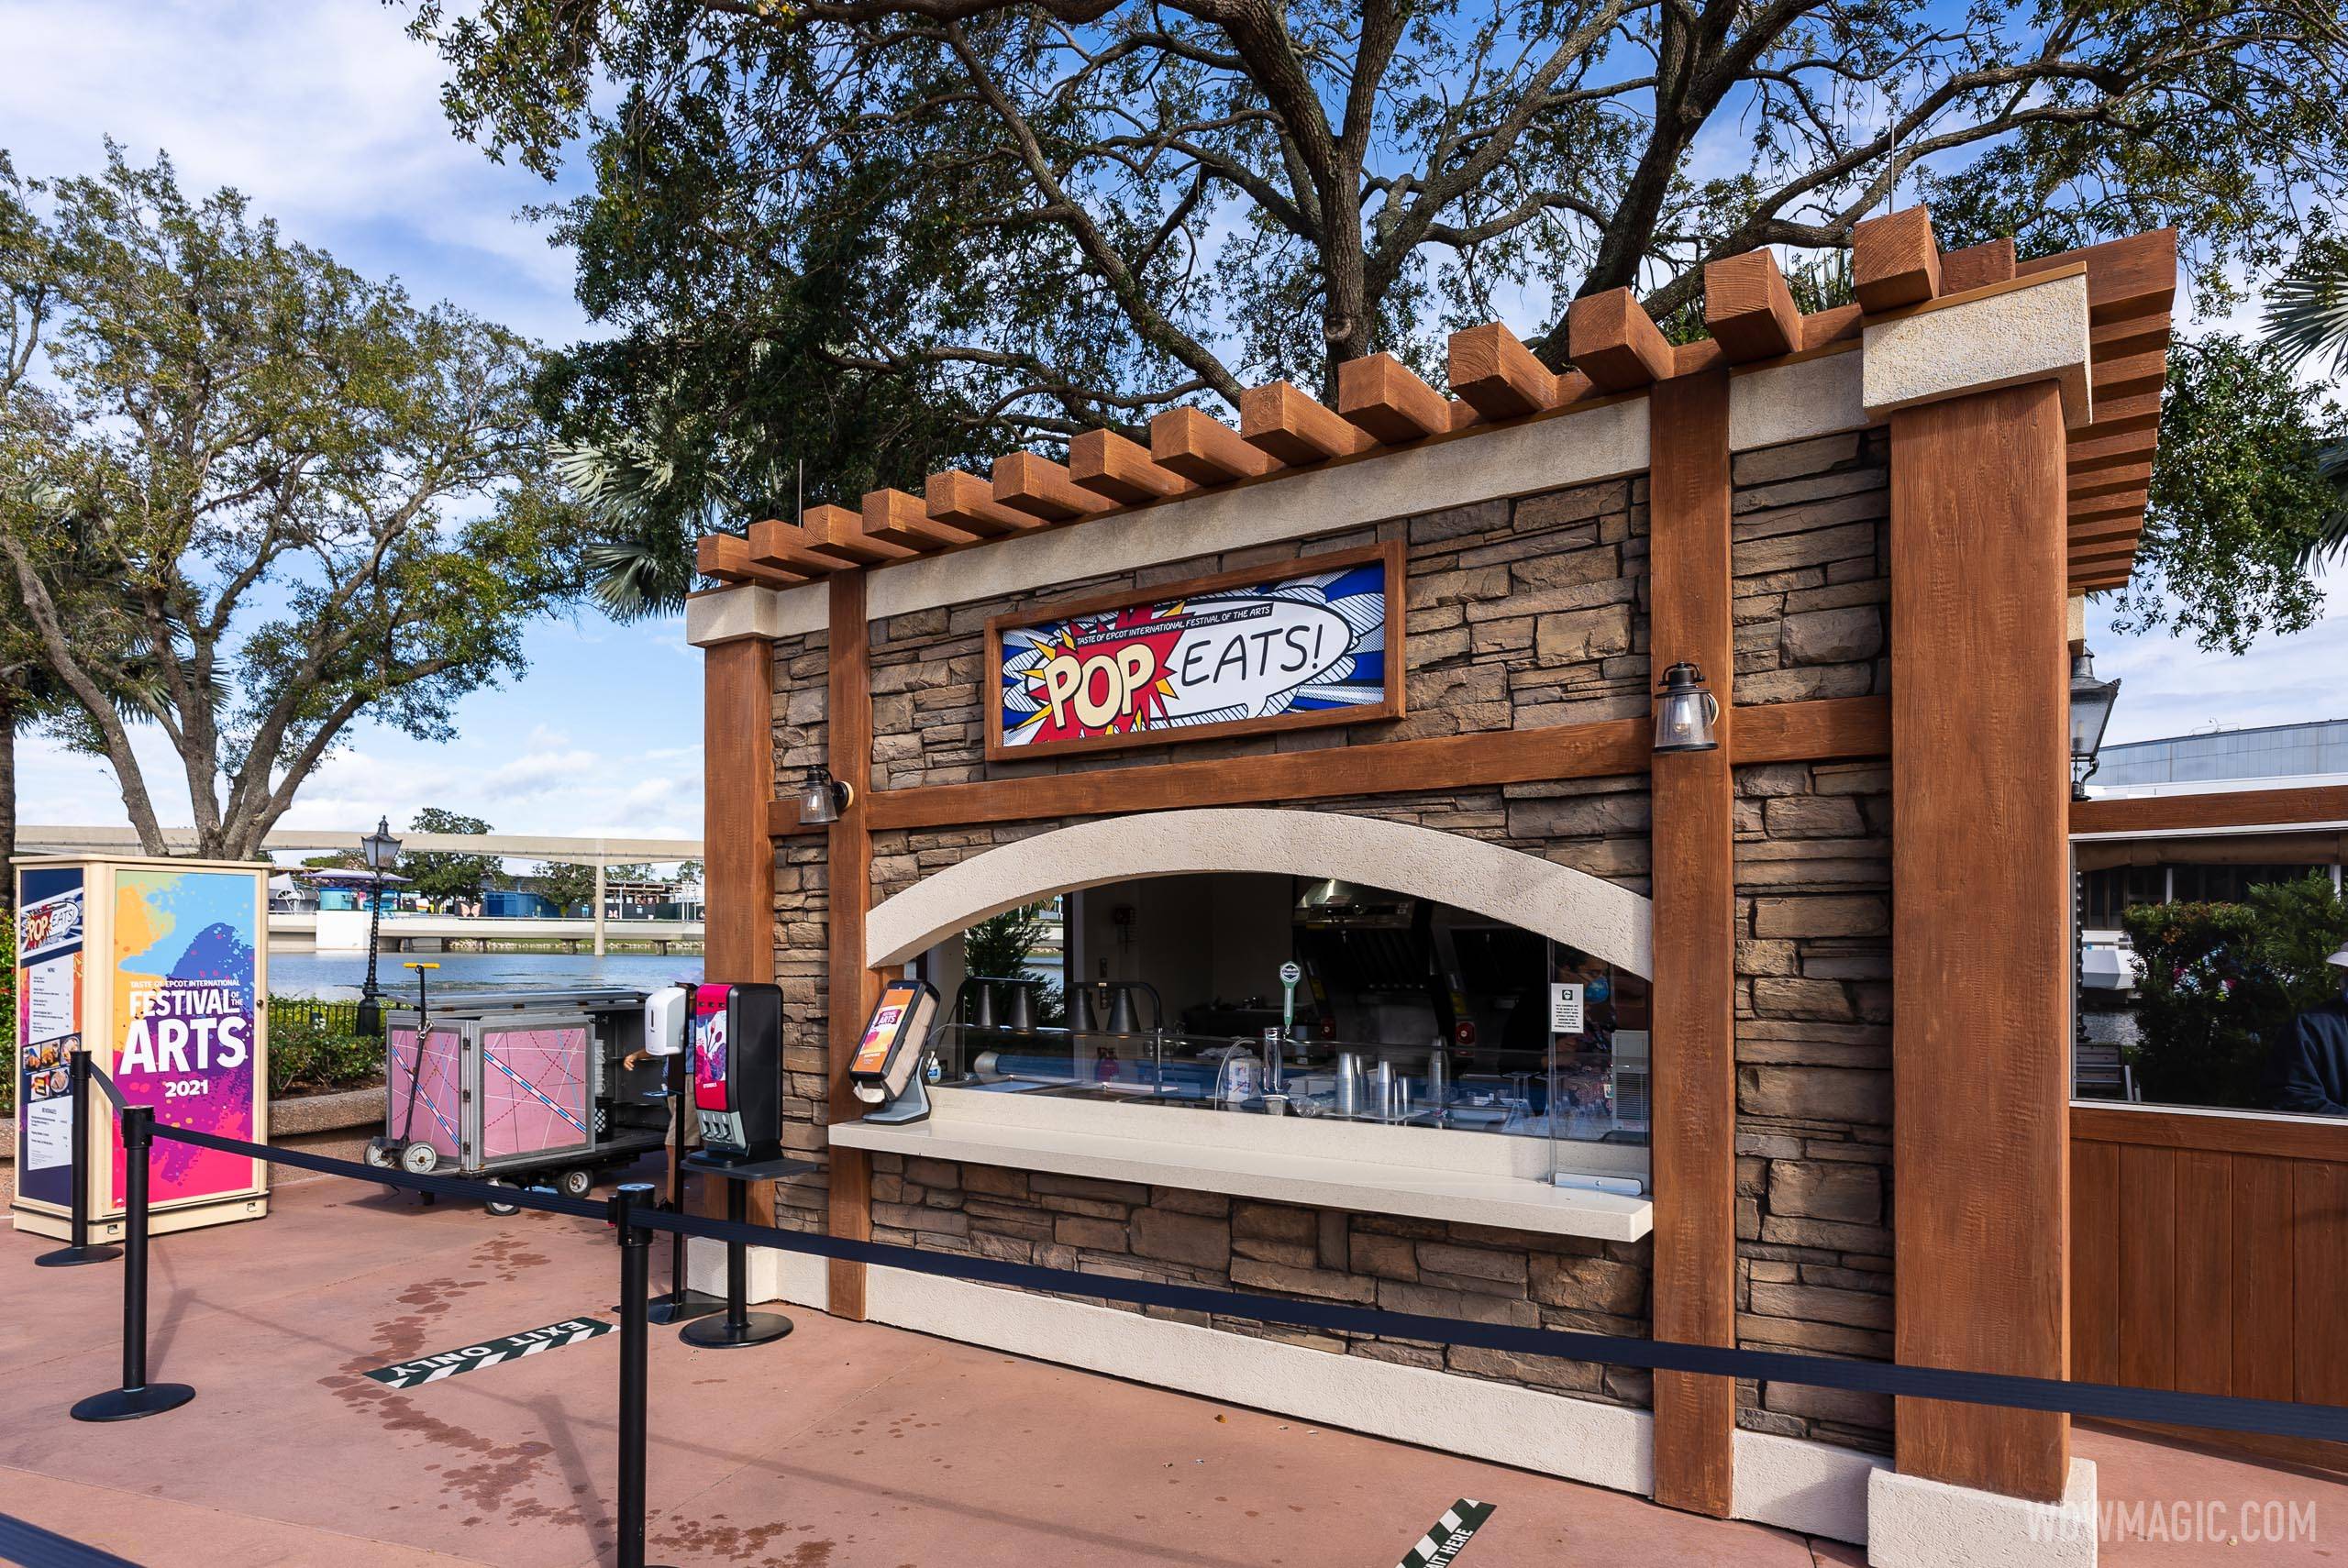 PHOTOS - All the Food Studio kiosks with pricing at the 2021 Taste of EPCOT International Festival of the Arts